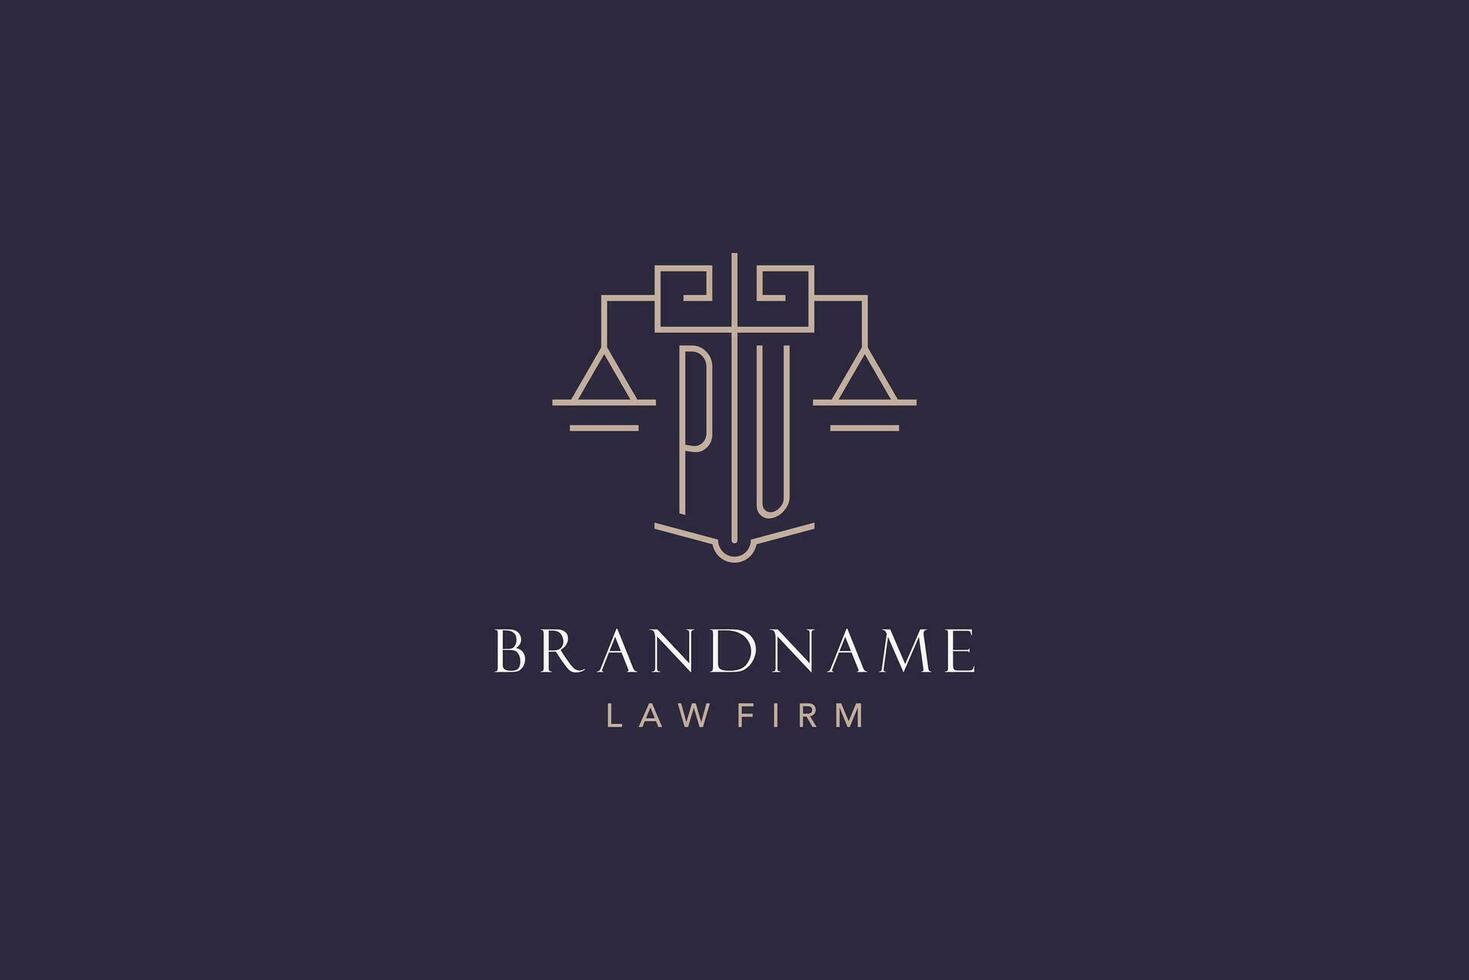 Initial letter PU logo with scale of justice logo design, luxury legal logo geometric style vector